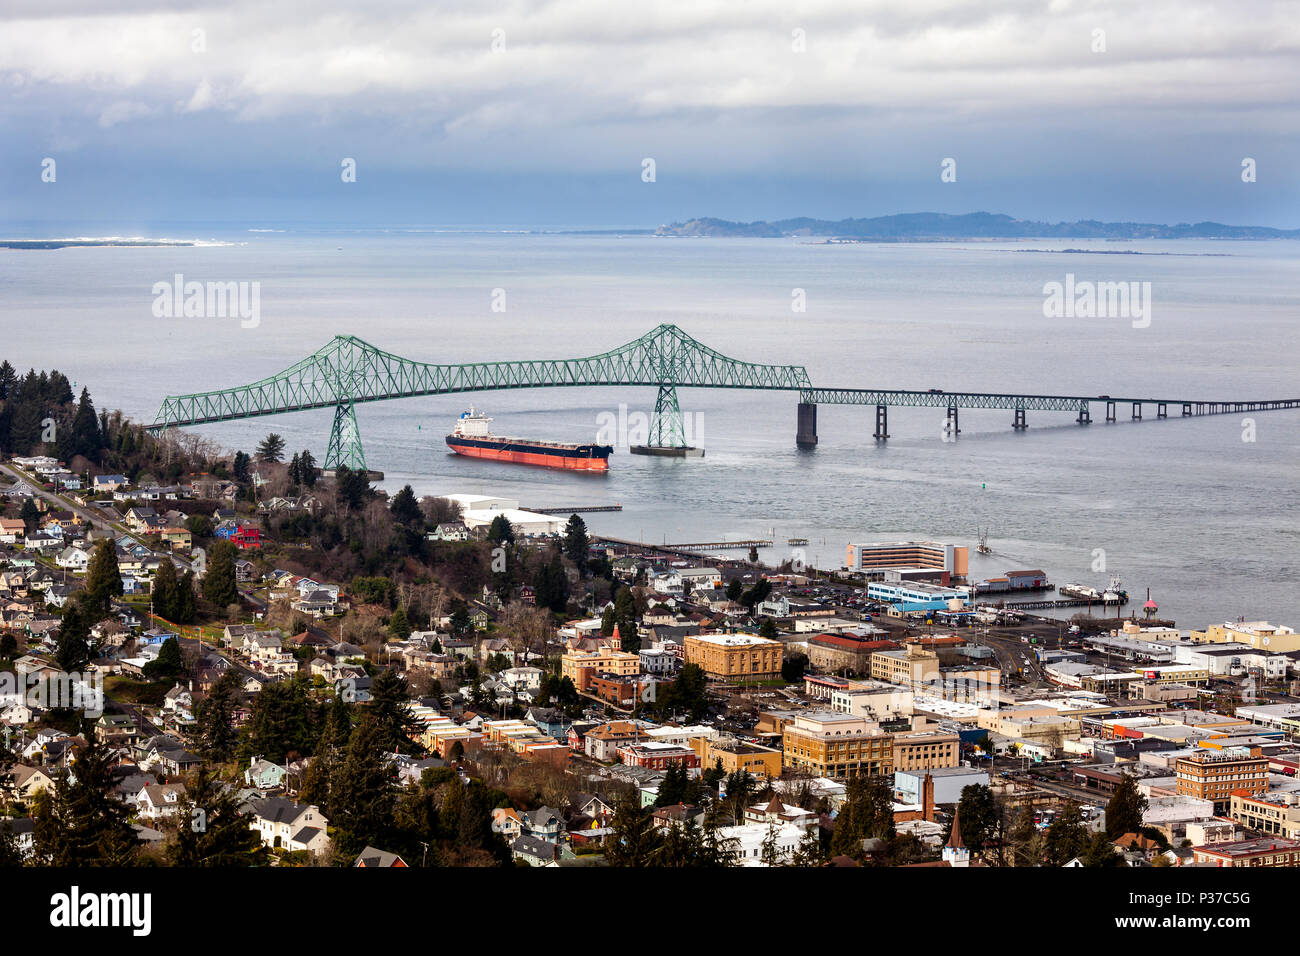 OR02475-00...OREGON - Cargo ship passes under the Astoria Bridge entering Young's Bay at the town of Astoria located next to the mouth of the Columbia Stock Photo